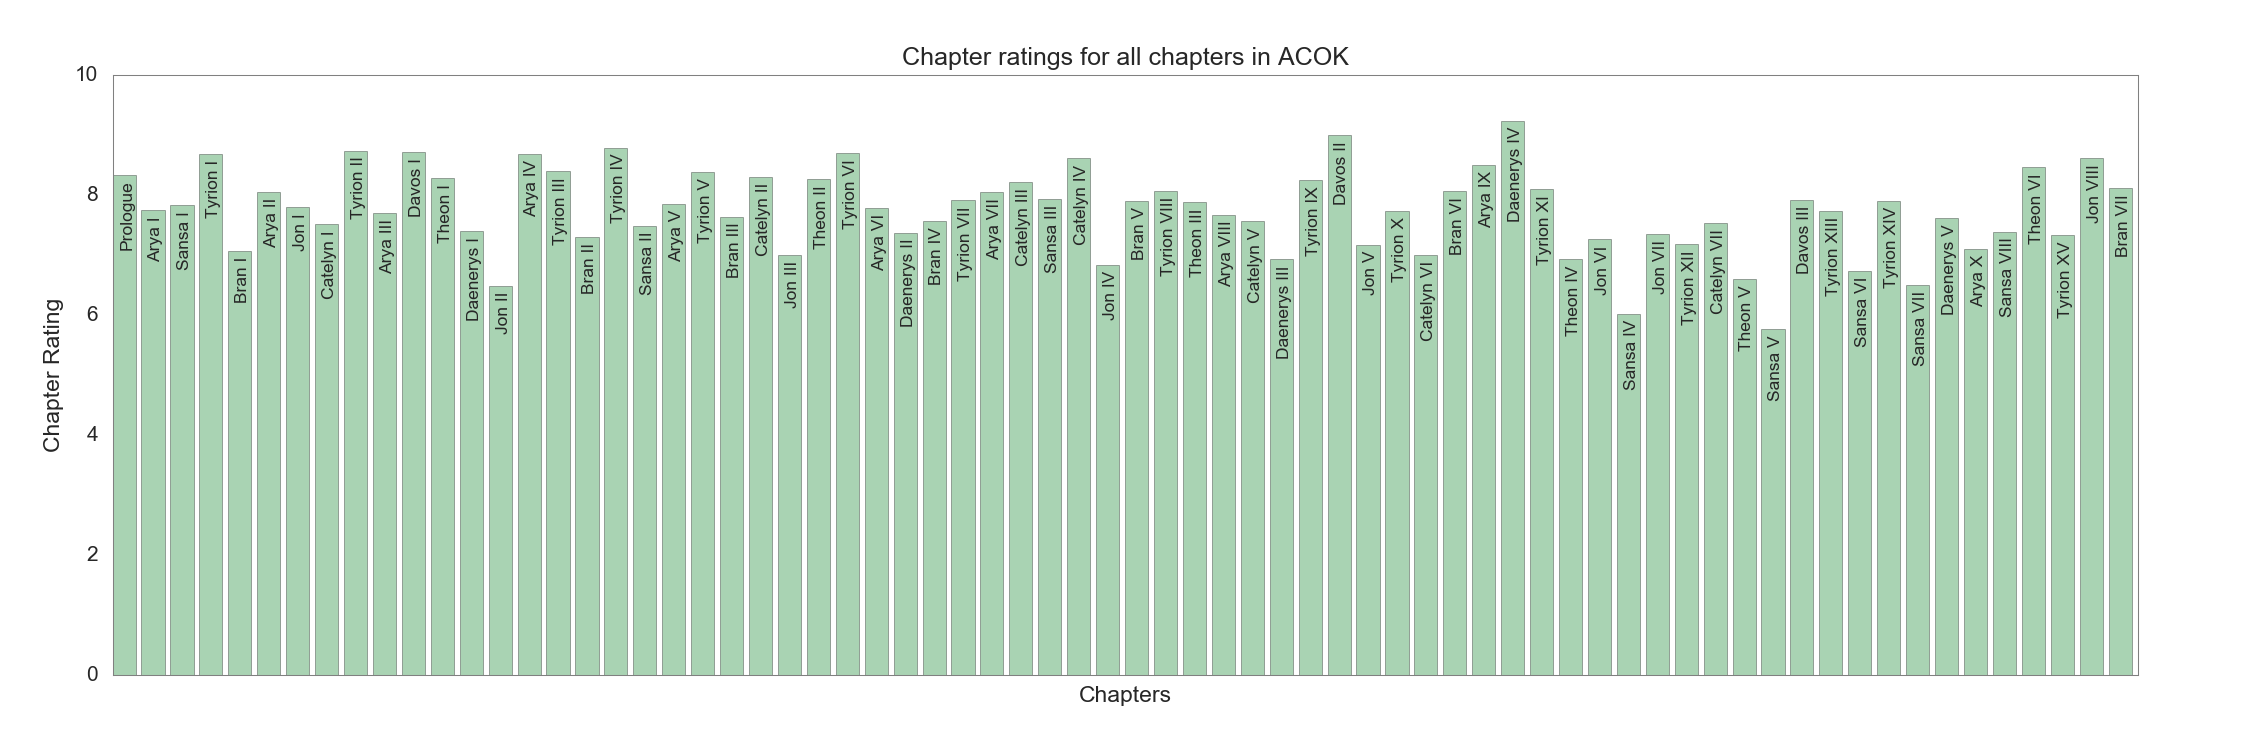 Chapter ratings in ACOK